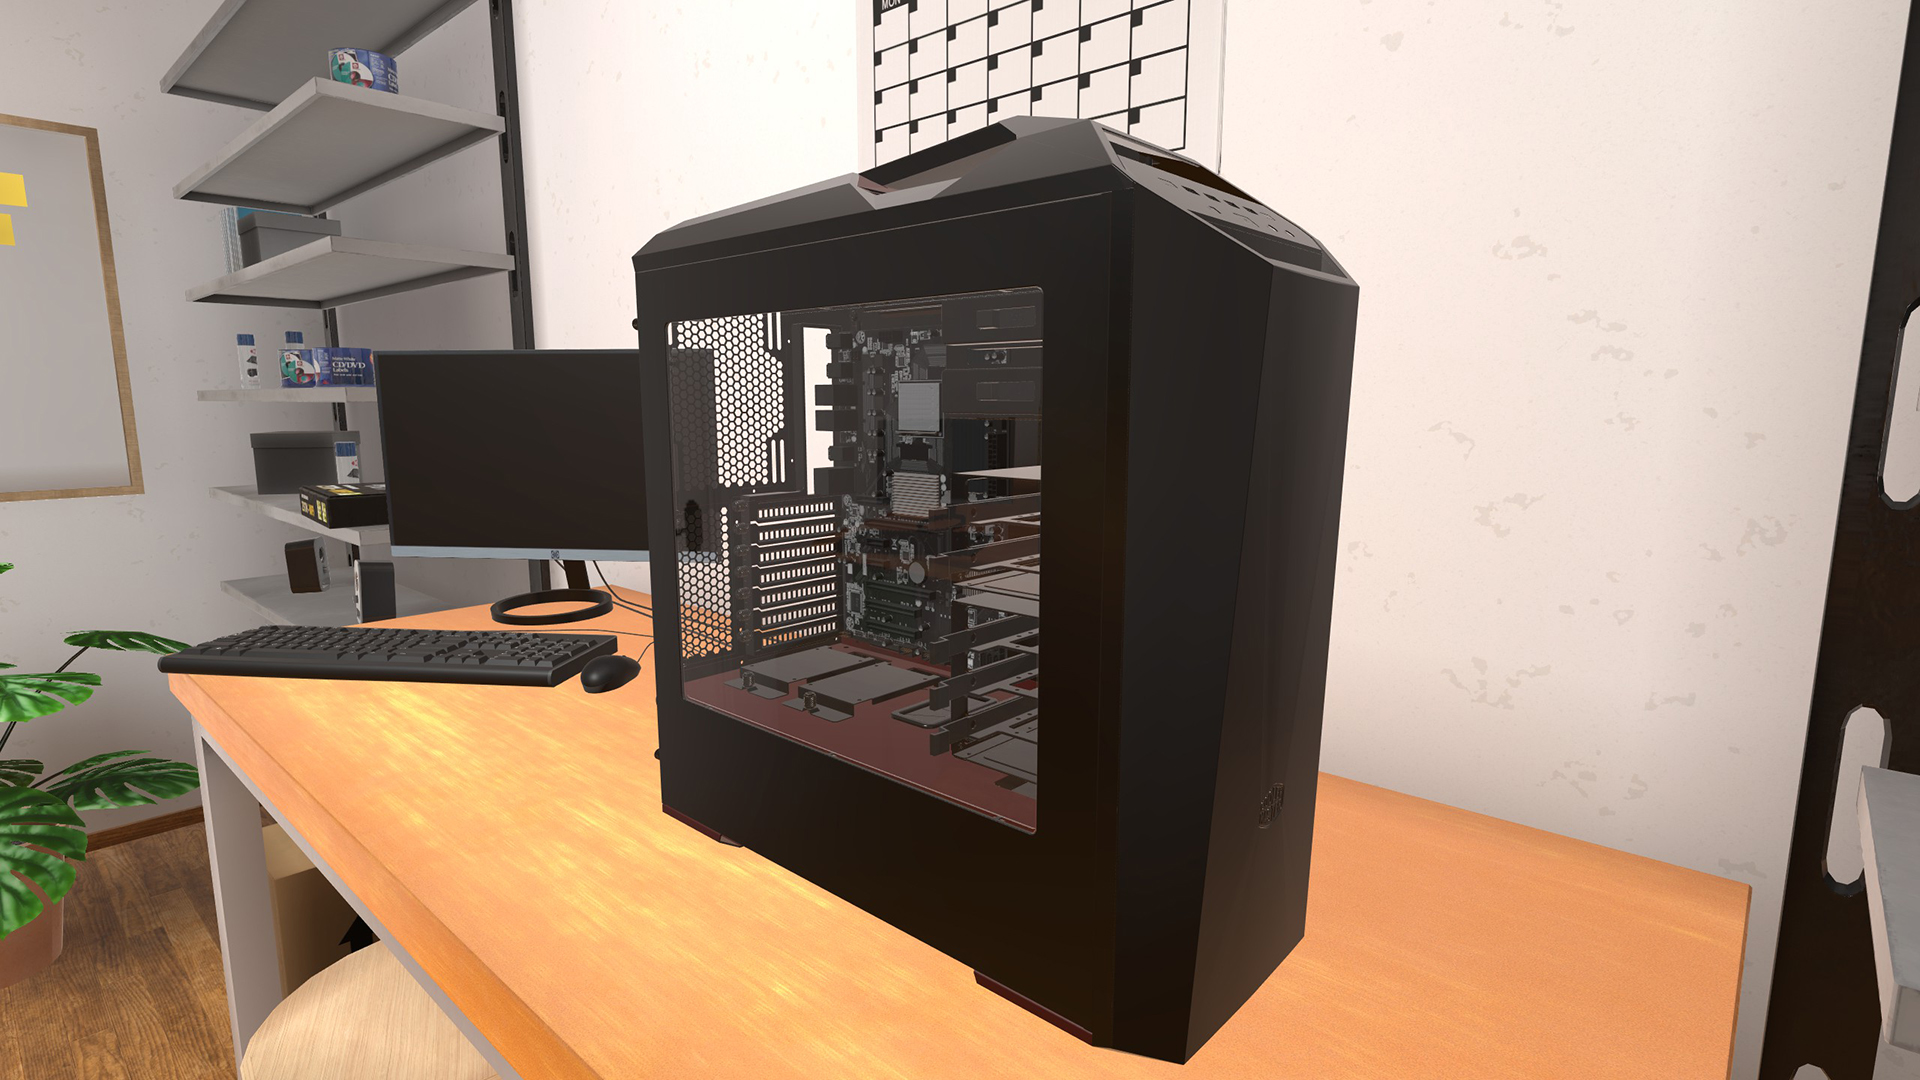 Build a Gaming PC in a Game via PC Building Simulator